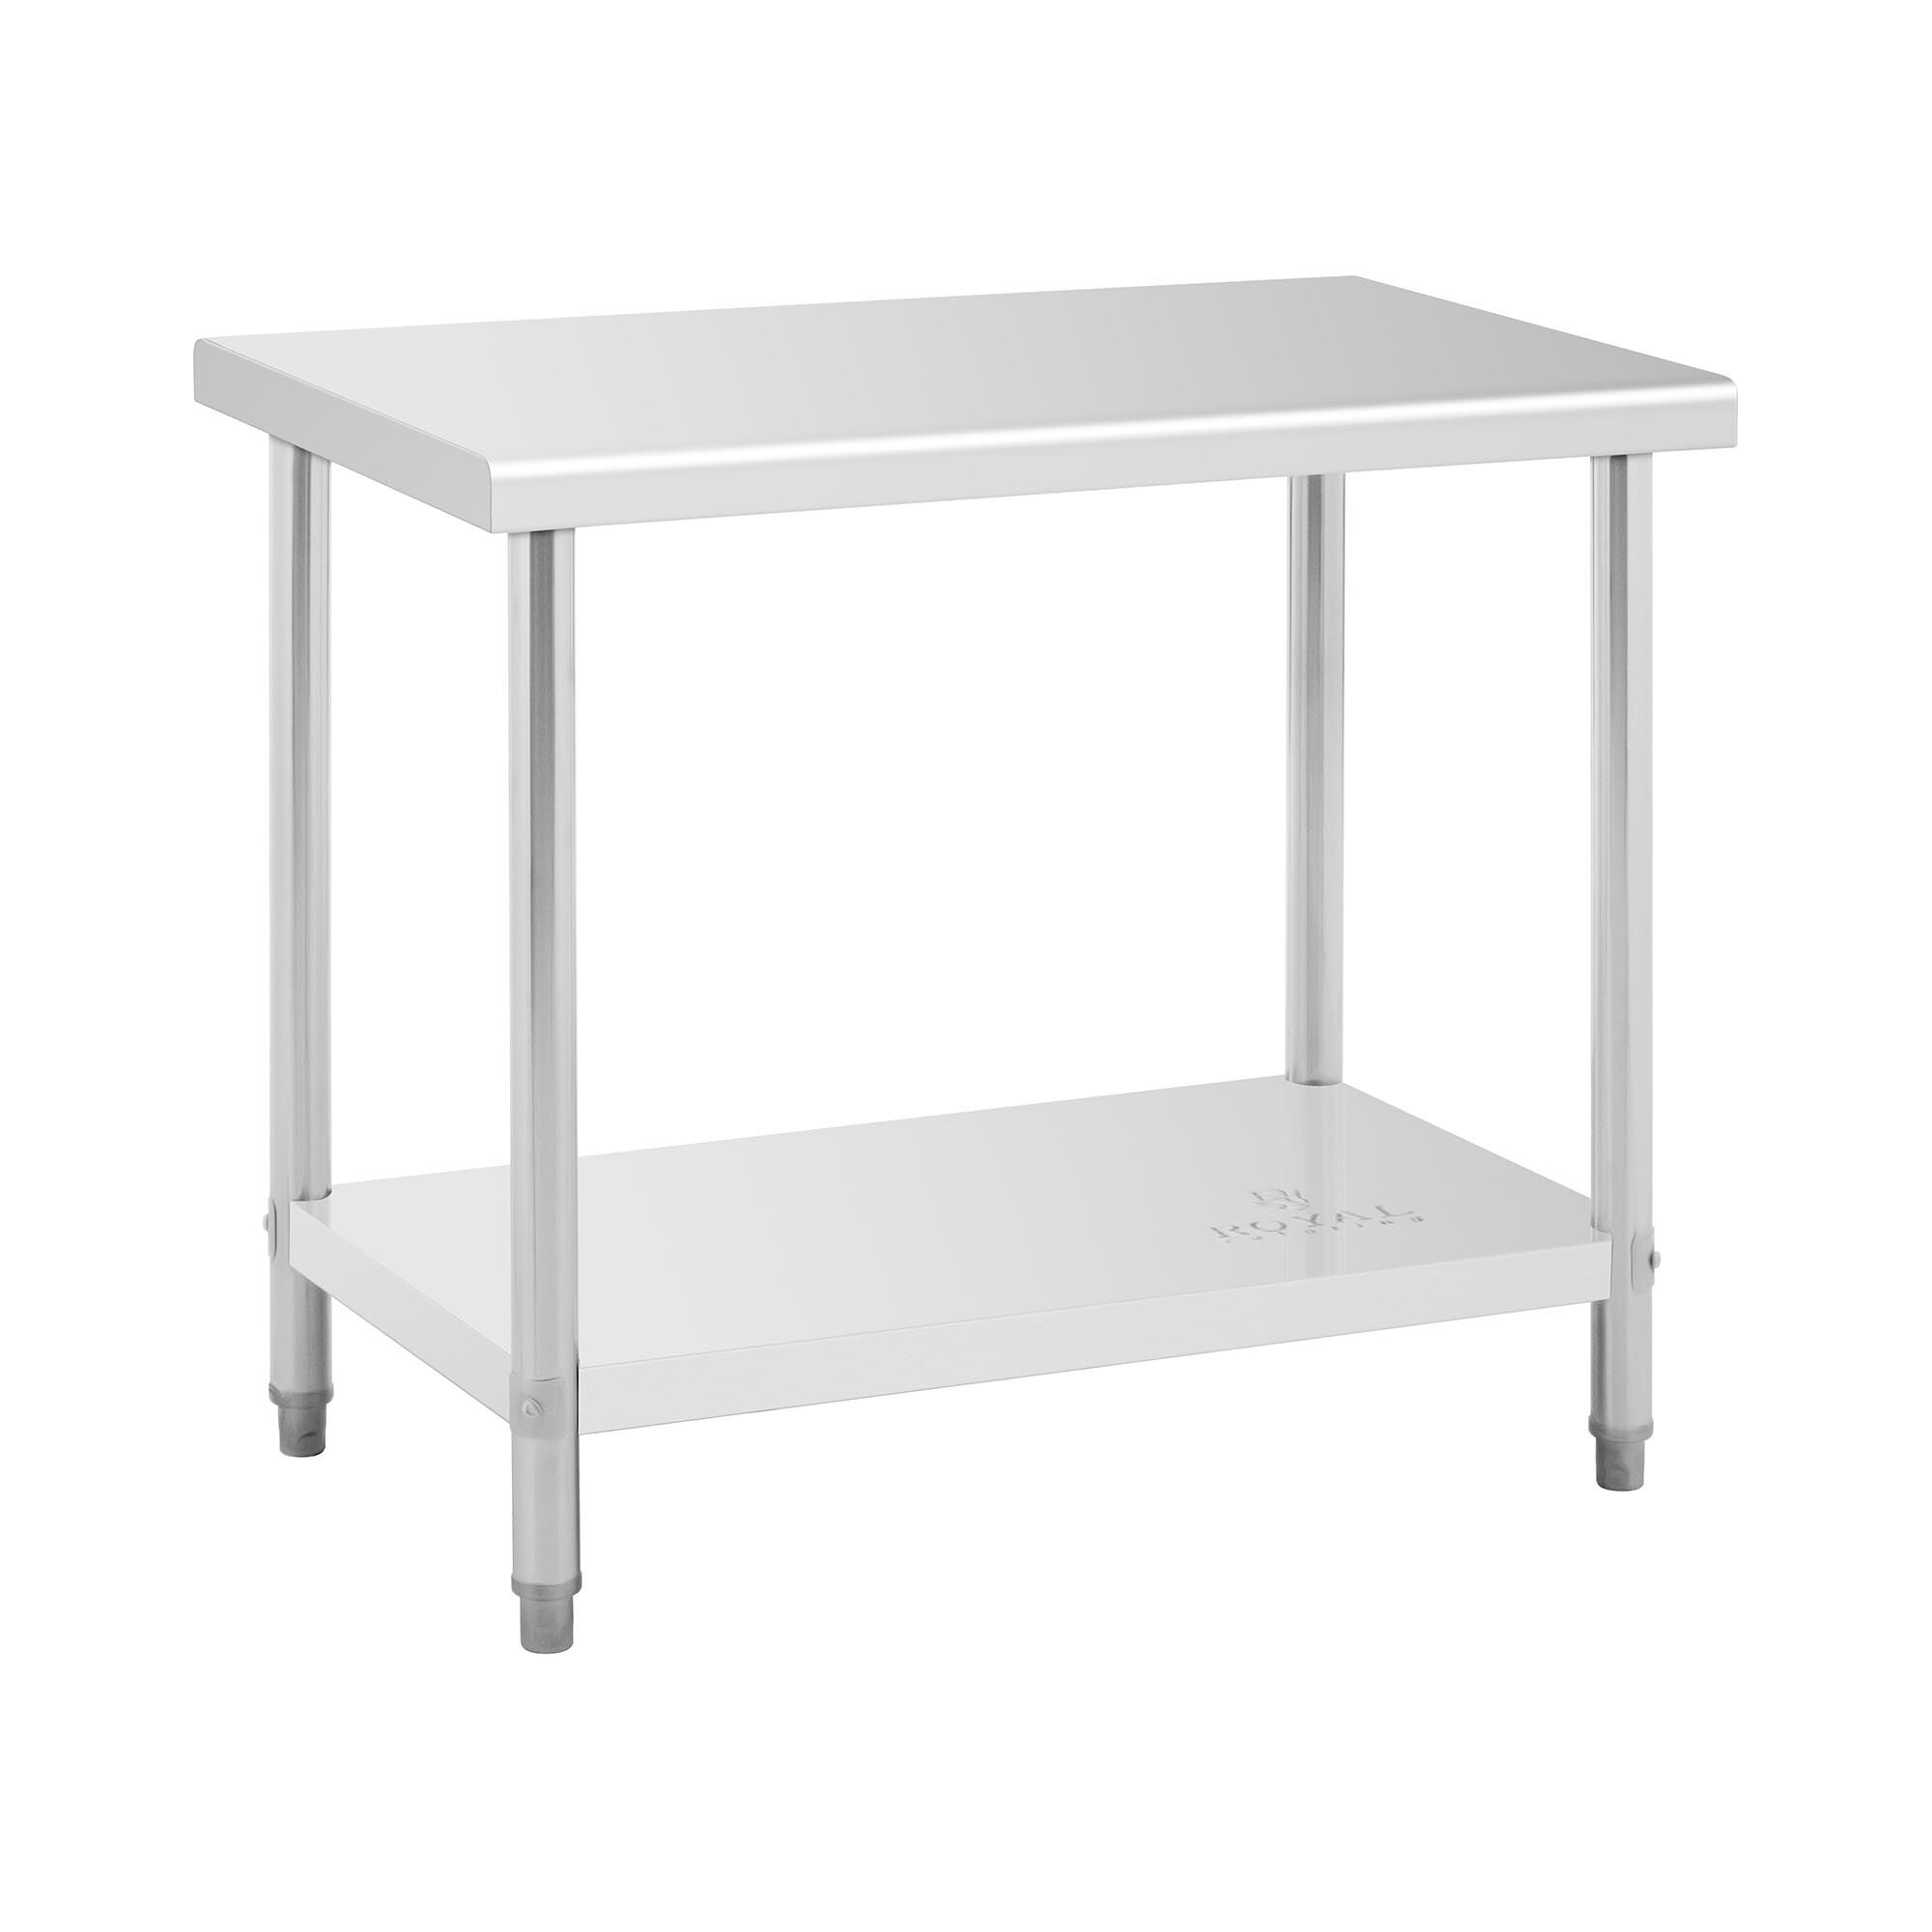 Royal Catering Stainless Steel Table - 100 x 60 cm - 114 kg load capacity RCAT-100/60